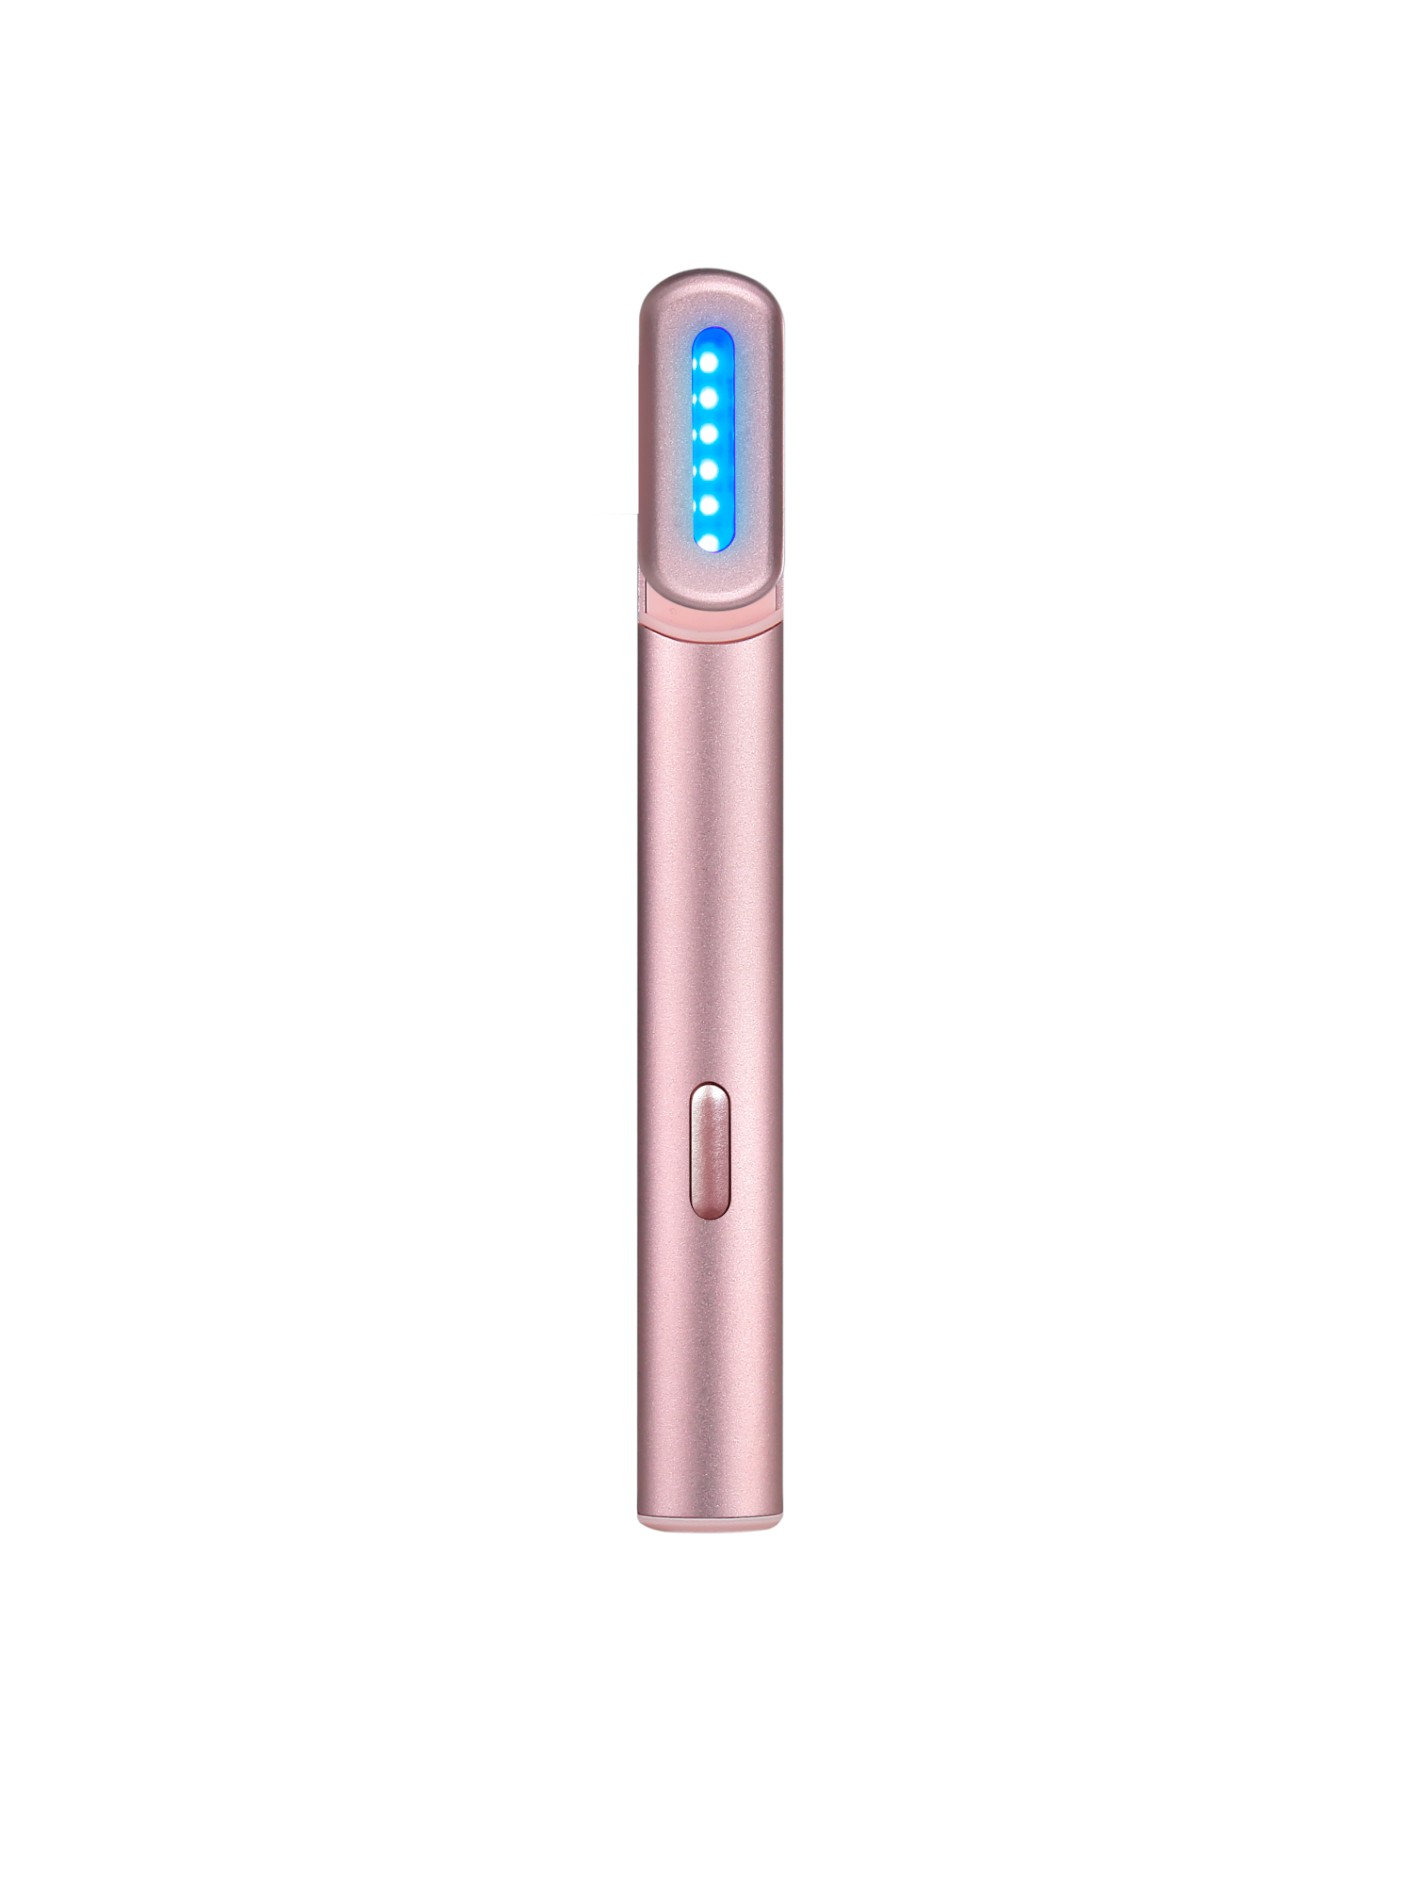 Wrinkle Remove Red And Blue Light EMS Eye Care Microcurrent Hot Compress Vibrating massage LED Skincare Wand